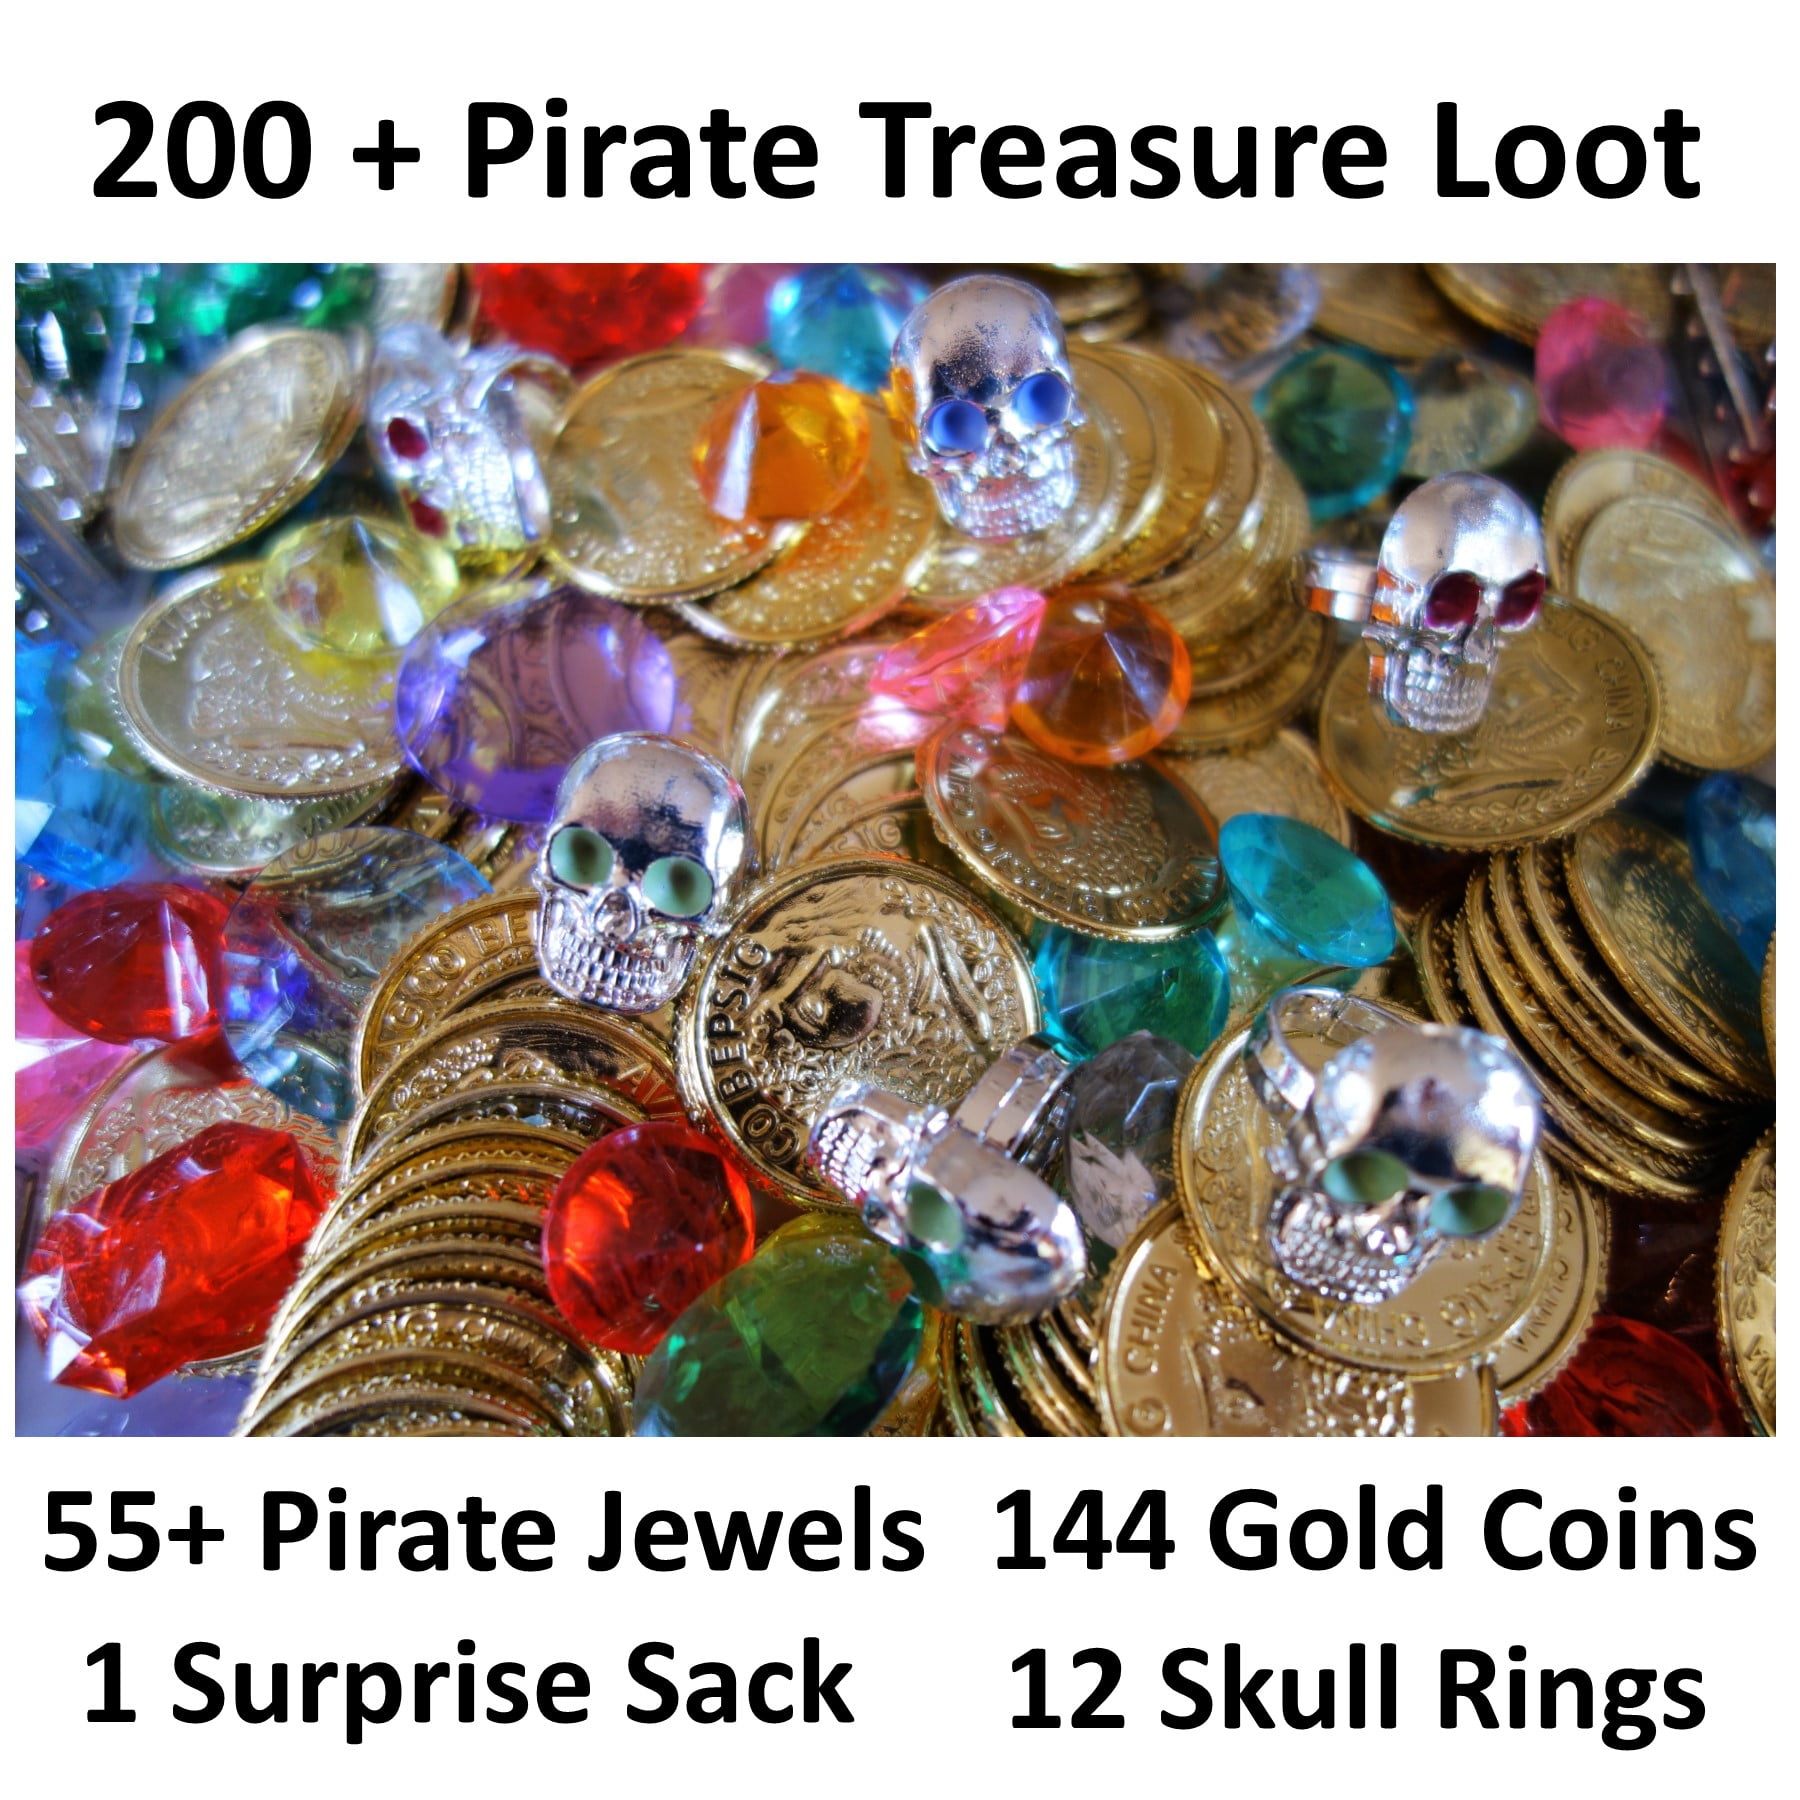 BAG OF PIRATE TREASURE FILLED WITH FAUX PEARLS AND GEMSTONES METAL COINS LOOTBAG 